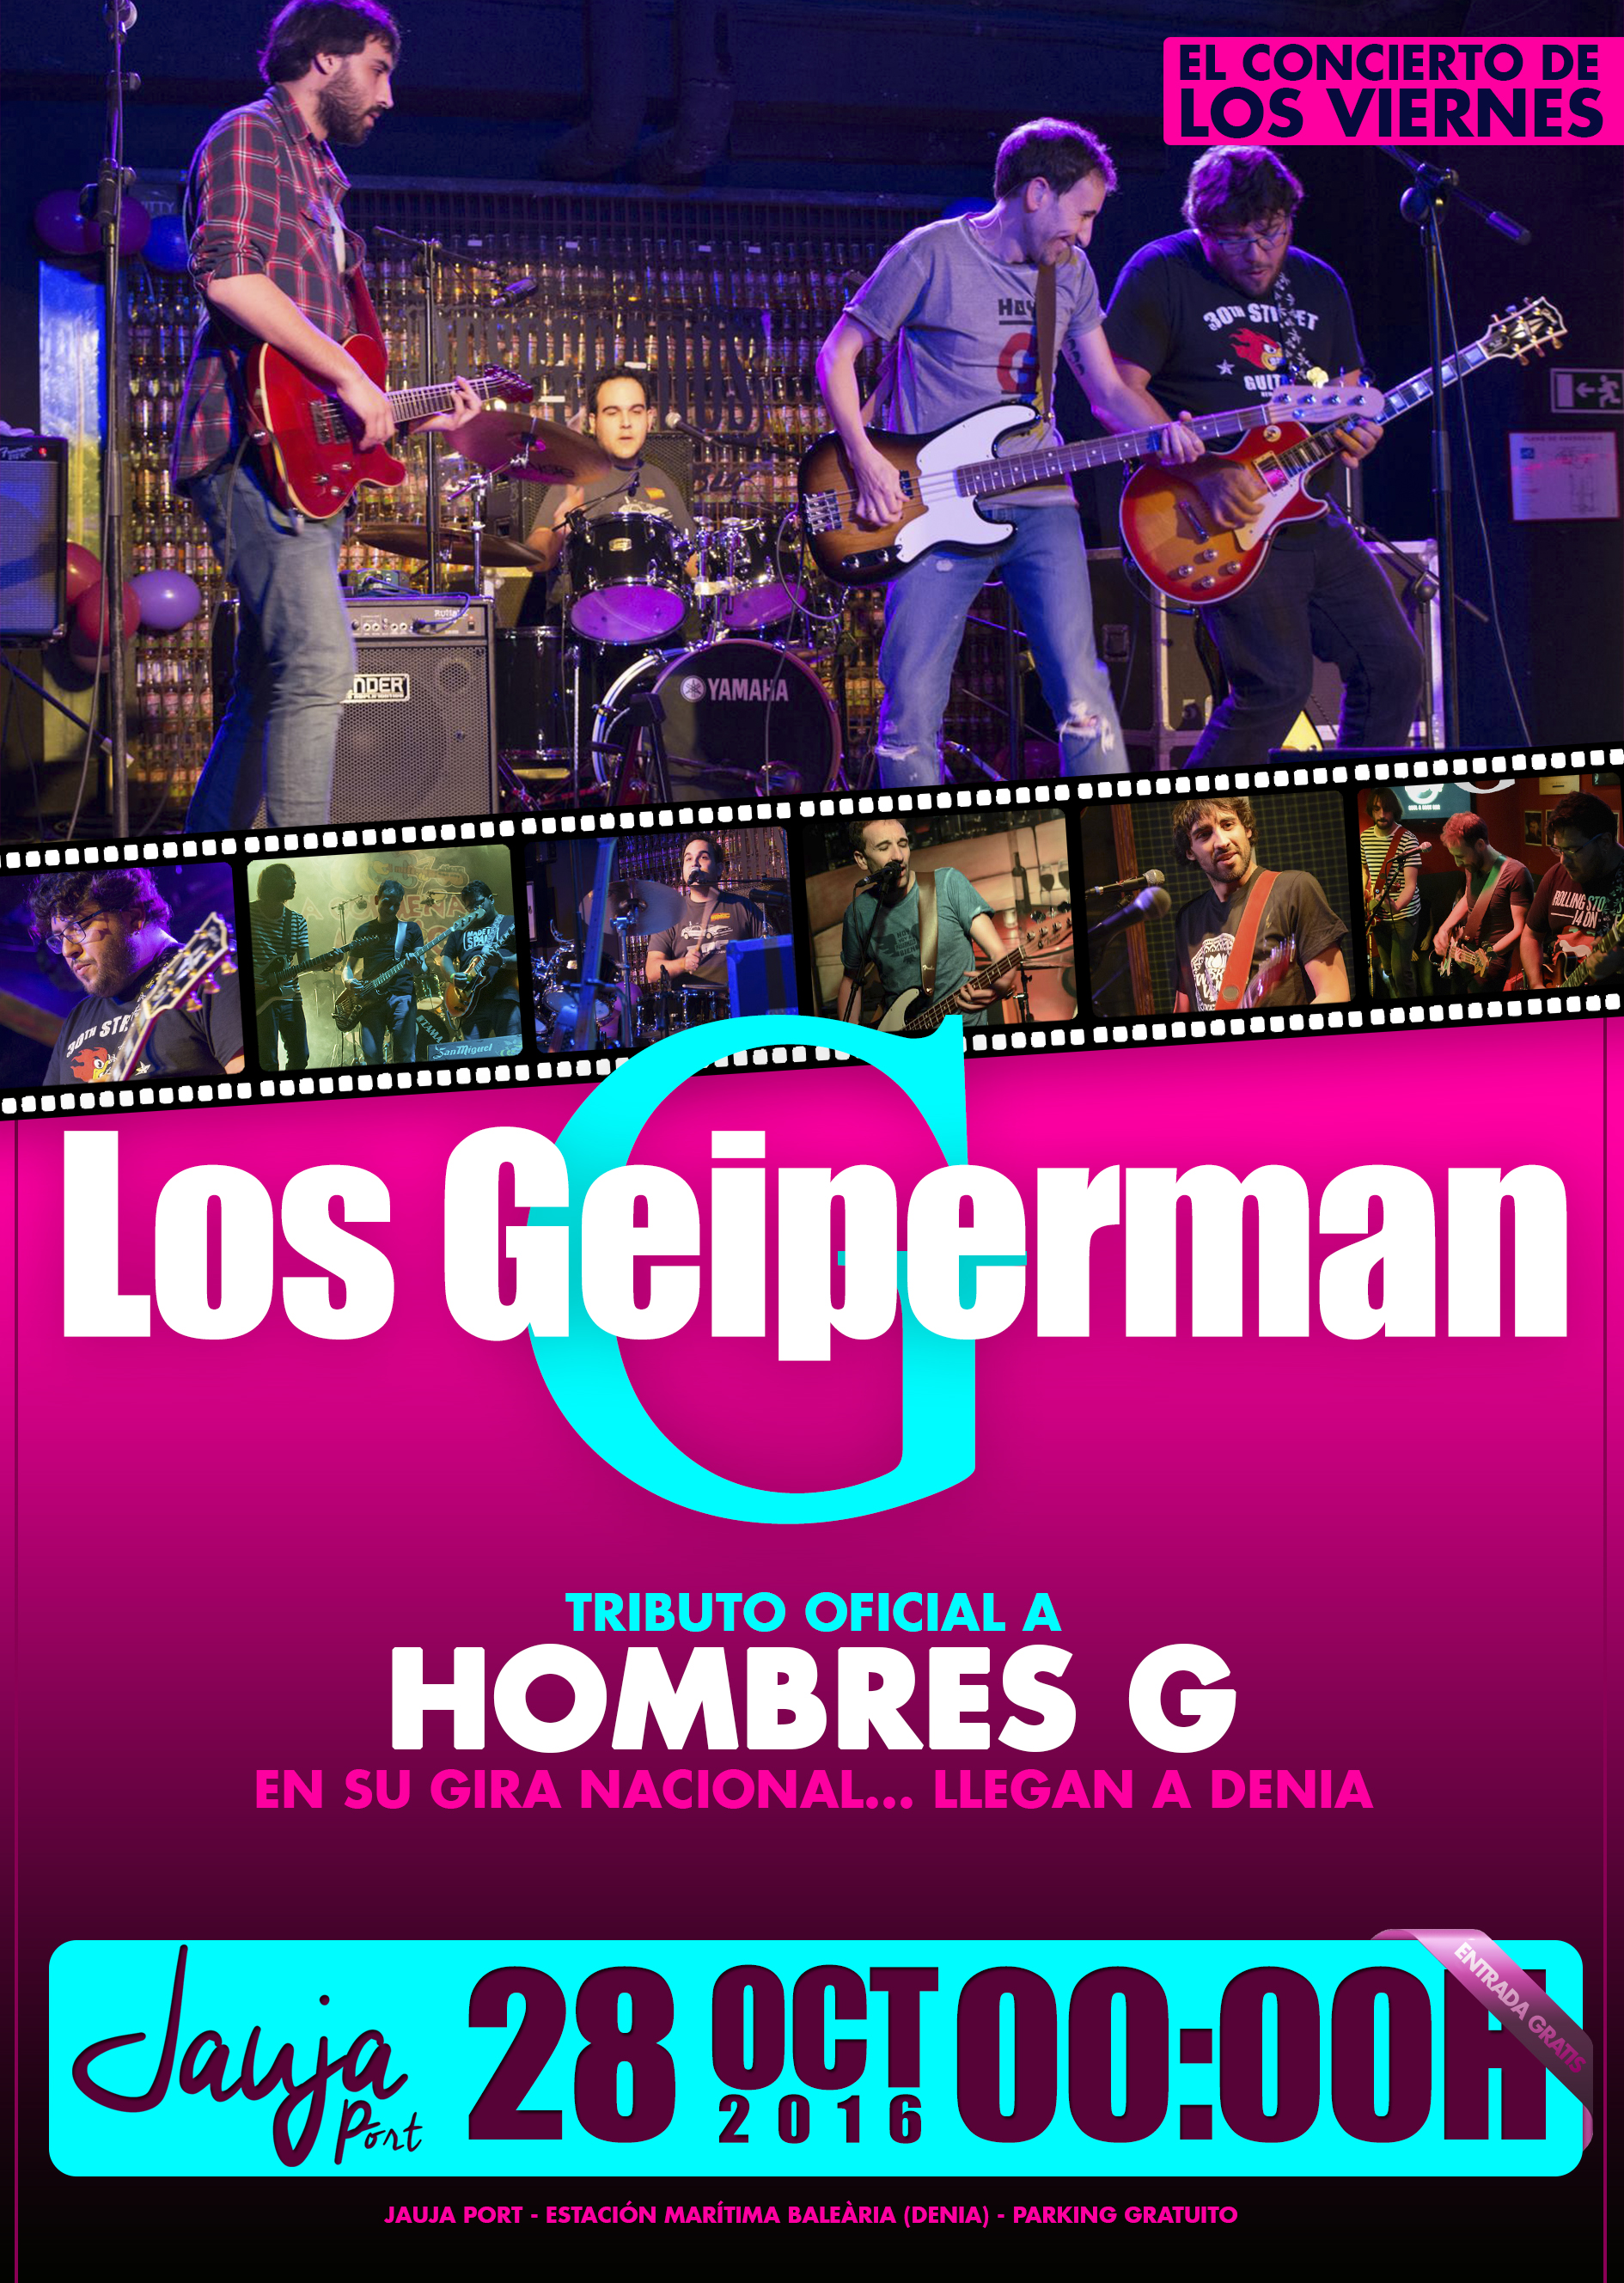 Tributo a Hombres G